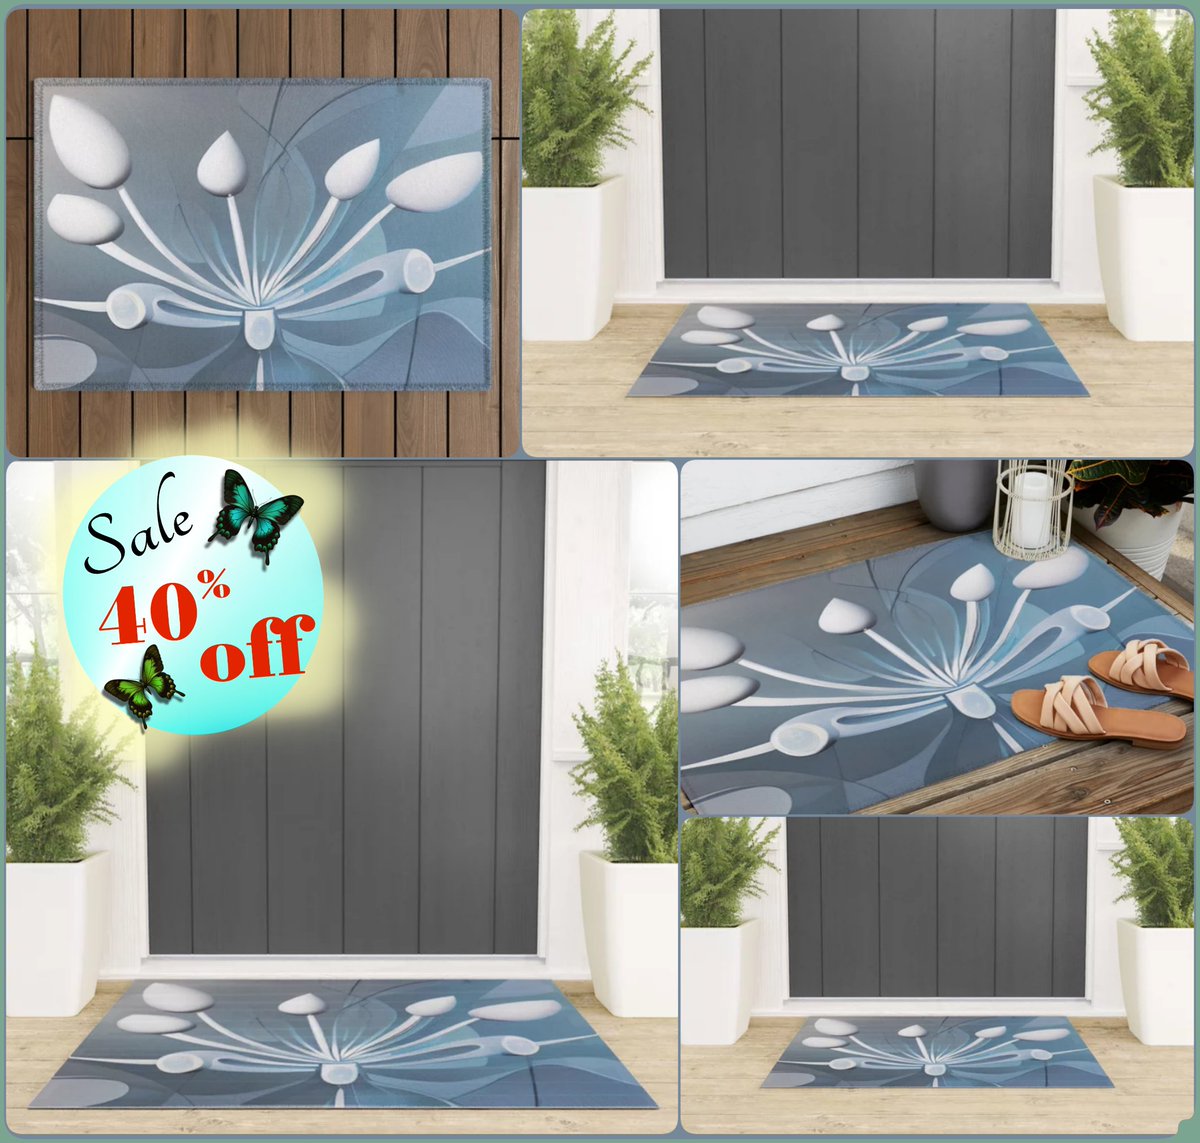 *SALE 40% Off*
Rhapsody Paradox Welcome Mat~by Art_Falaxy
~Refreshingly Unique~ #artfalaxy #art #rugs #mats #homedecor #society6 #Society6max #swirls #modern #trendy #accents #floorrugs #welcome #outdoorrugs #gray #white #blue

society6.com/product/rhapso…